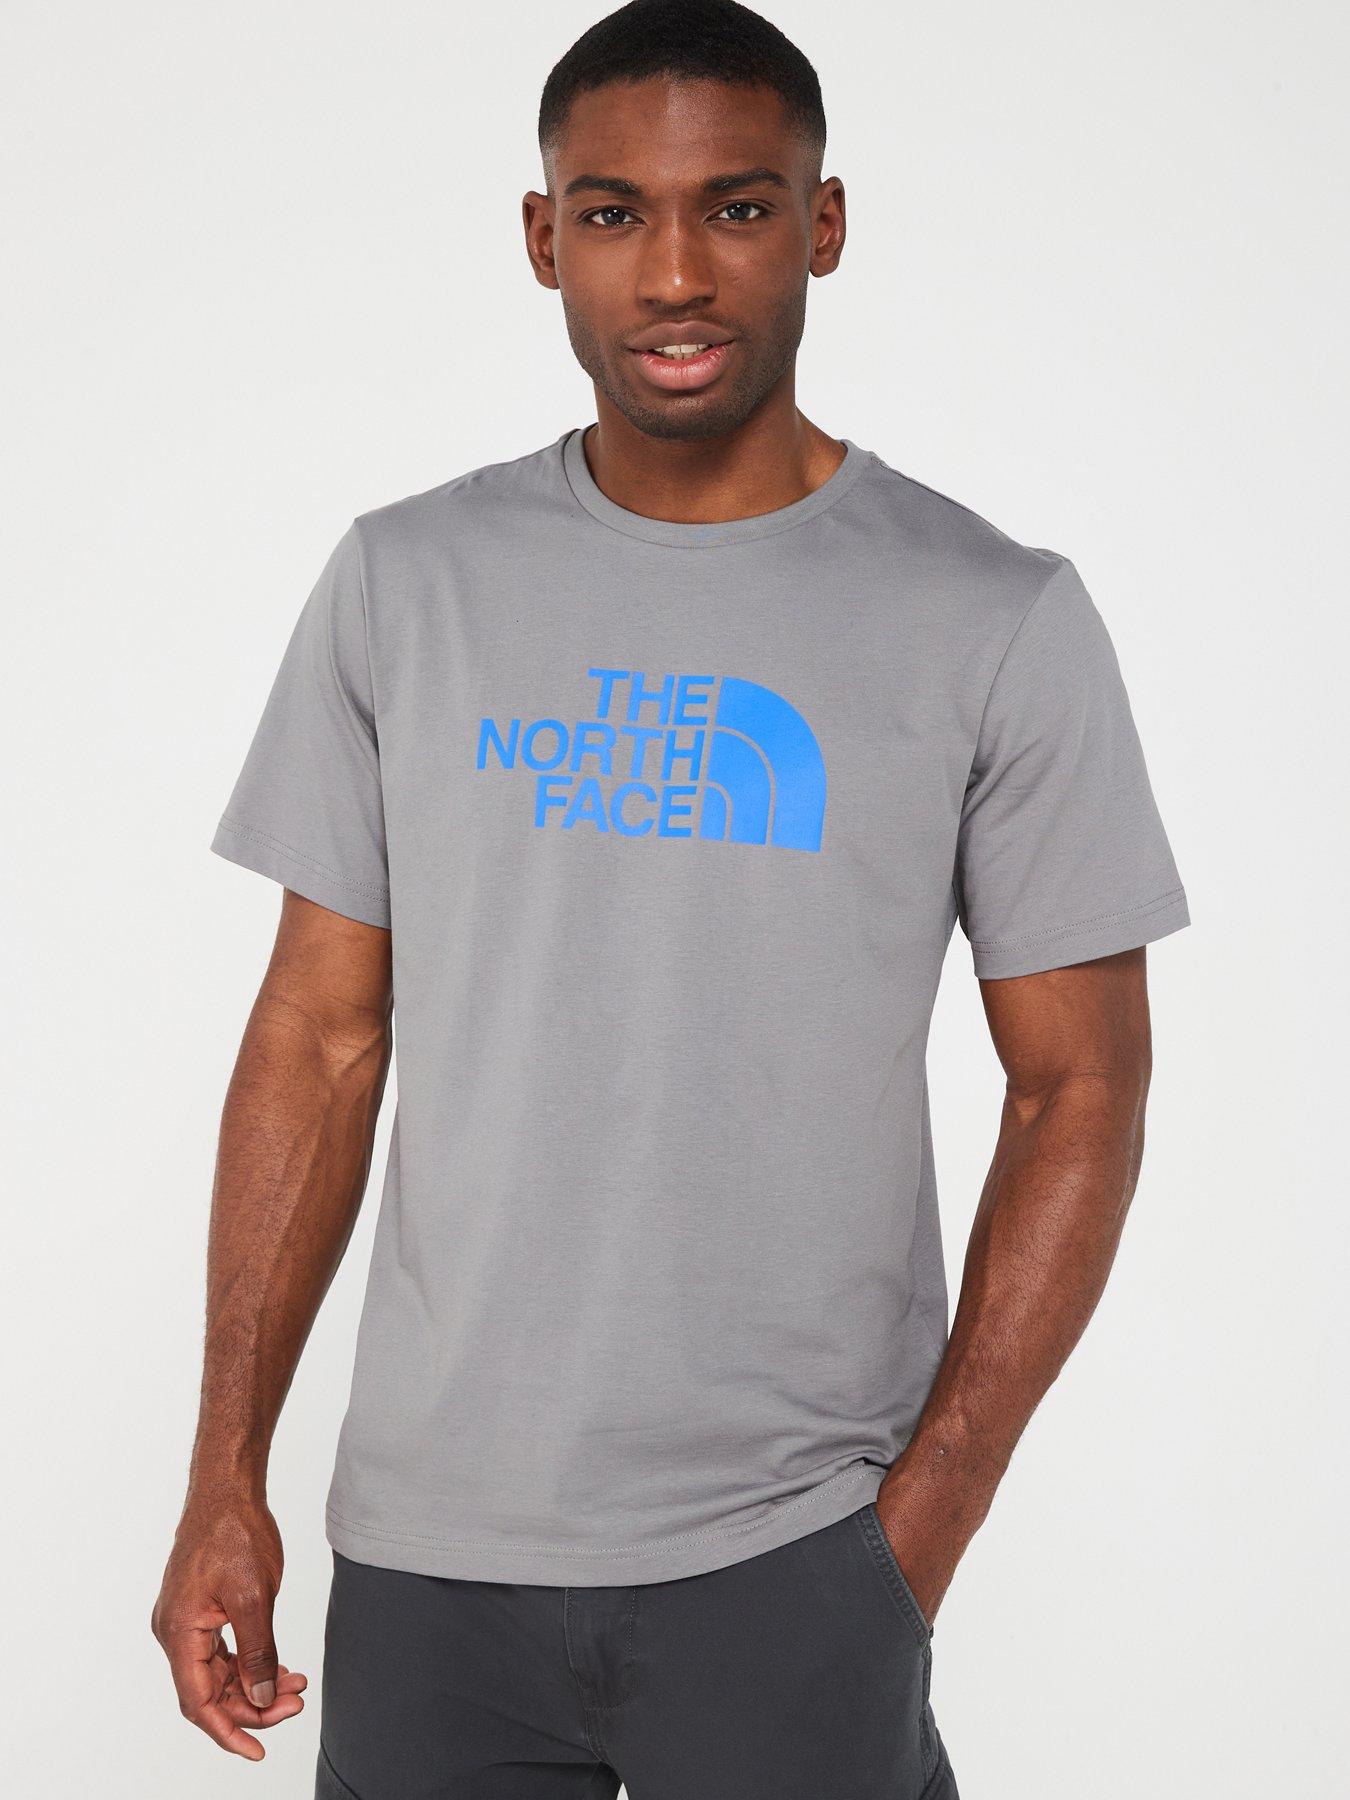 The north face, T-shirts & polos, Men